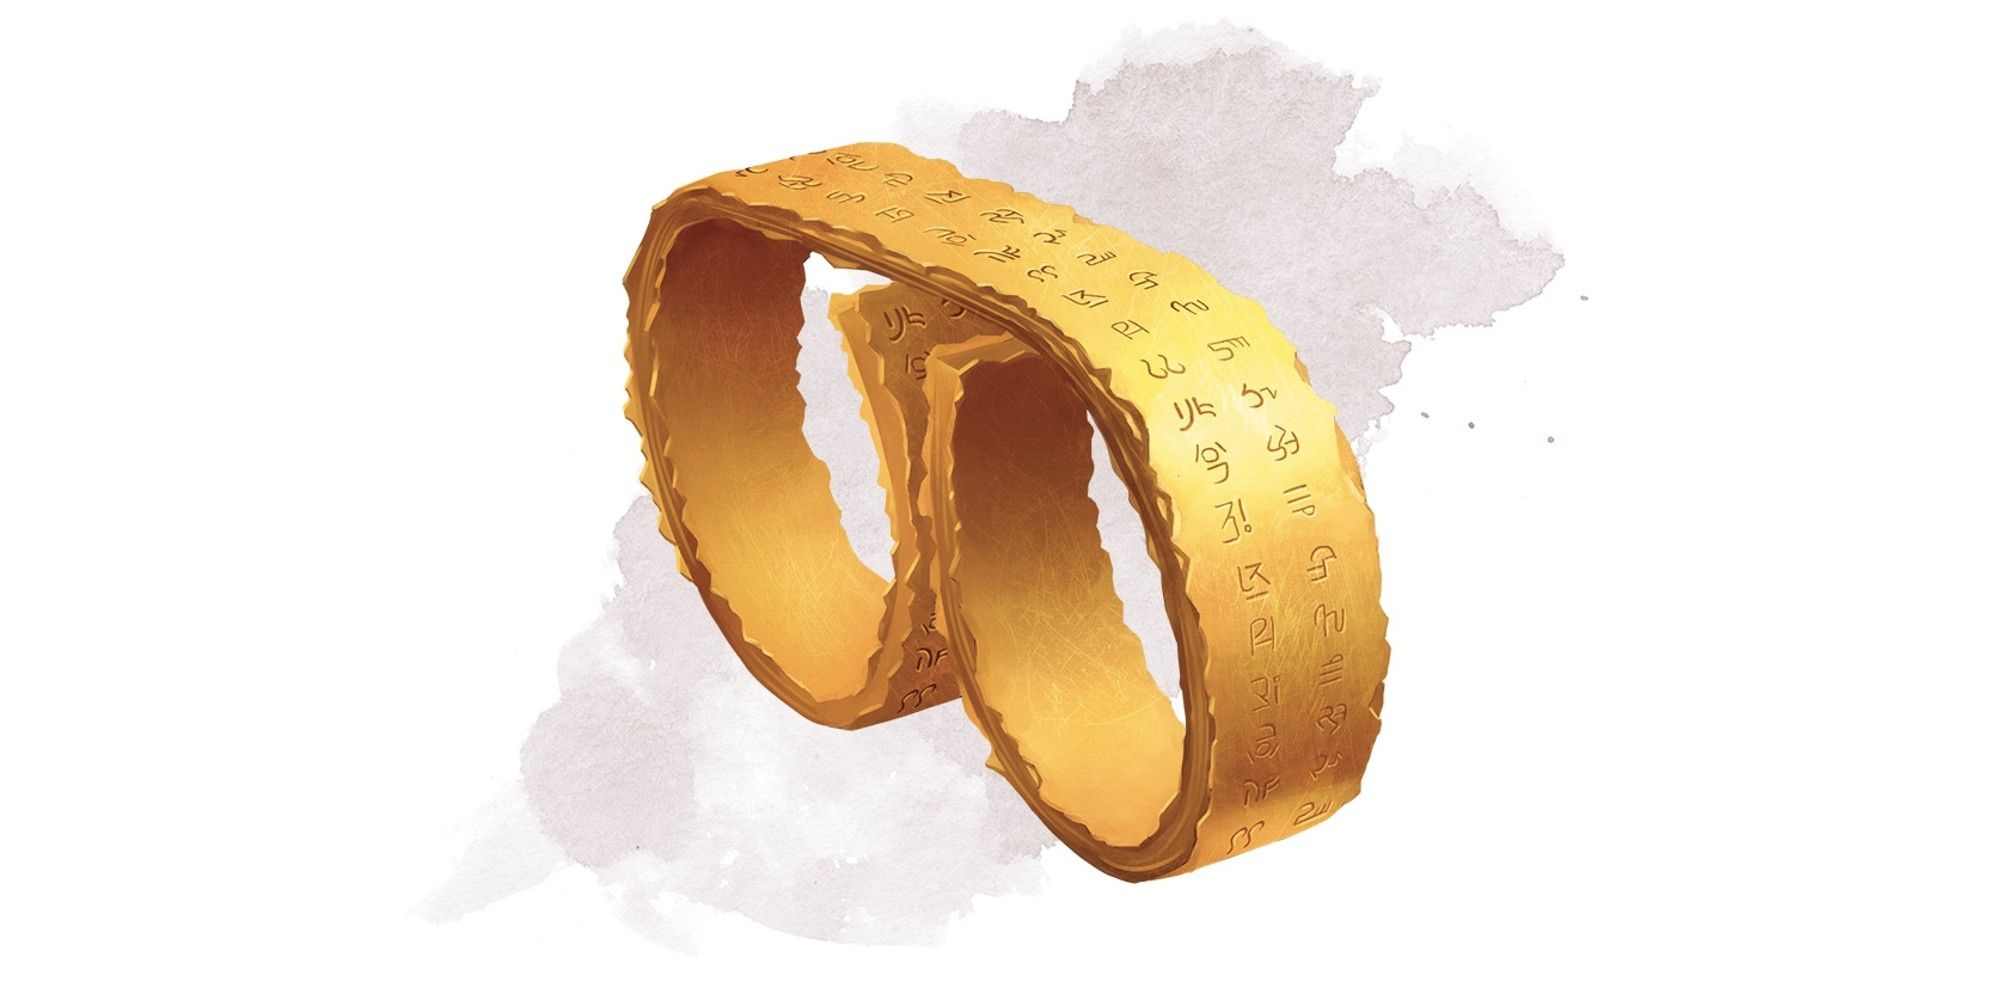 Golden D&D Ring of Spell Storing, it has small carved runes on the outside and loops for two fingers.